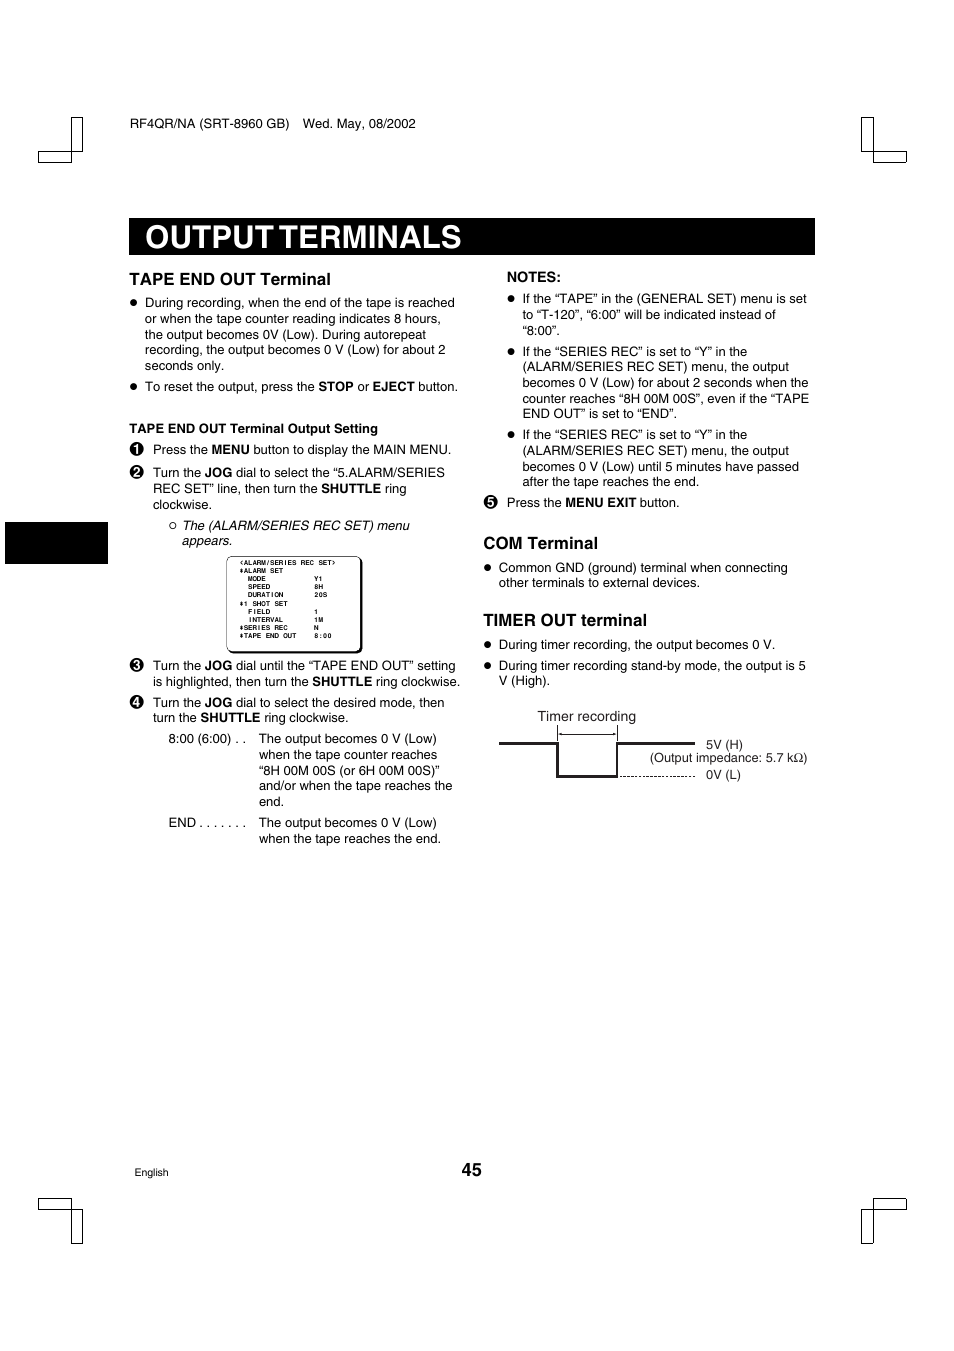 Output terminals, Tape end out terminal, Com terminal | Timer out terminal | Sharp SRT-8040 User Manual | Page 46 / 56